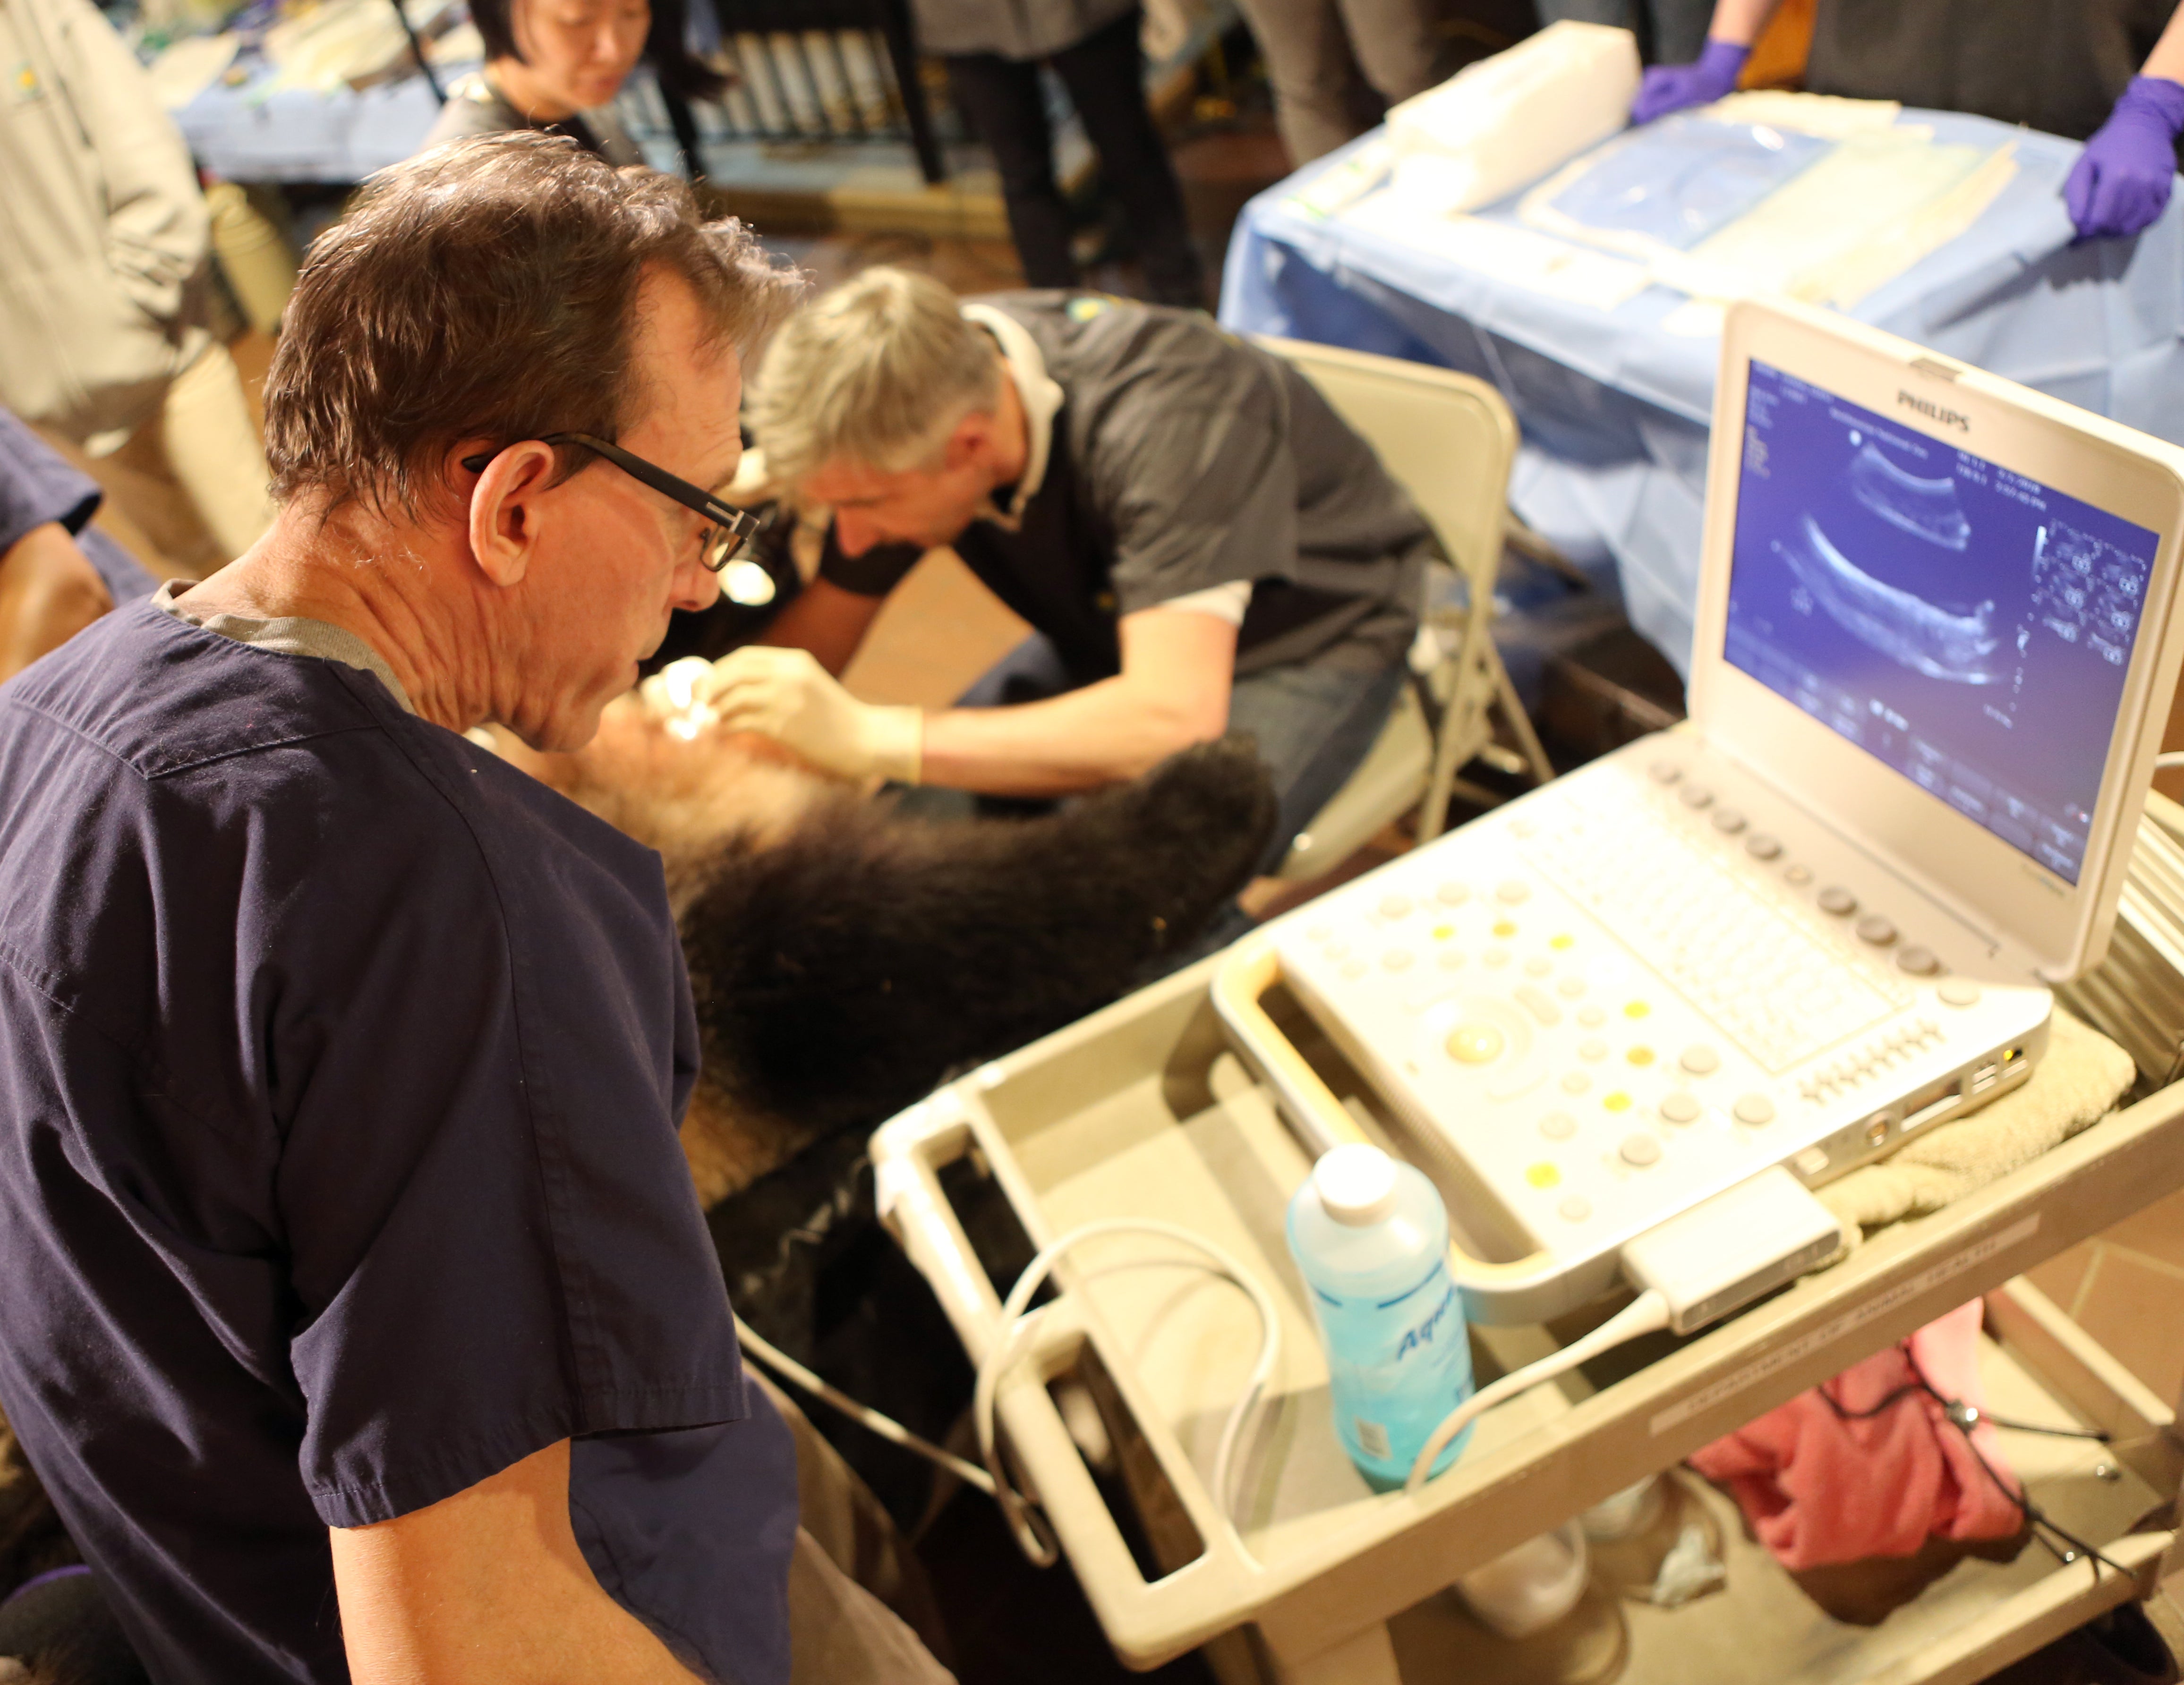 Veterinarian Dr. Don Neiffer looks at an ultrasound as Research Biologist Dr. Pierre Comizzoli artificially inseminates giant panda Mei Xiang